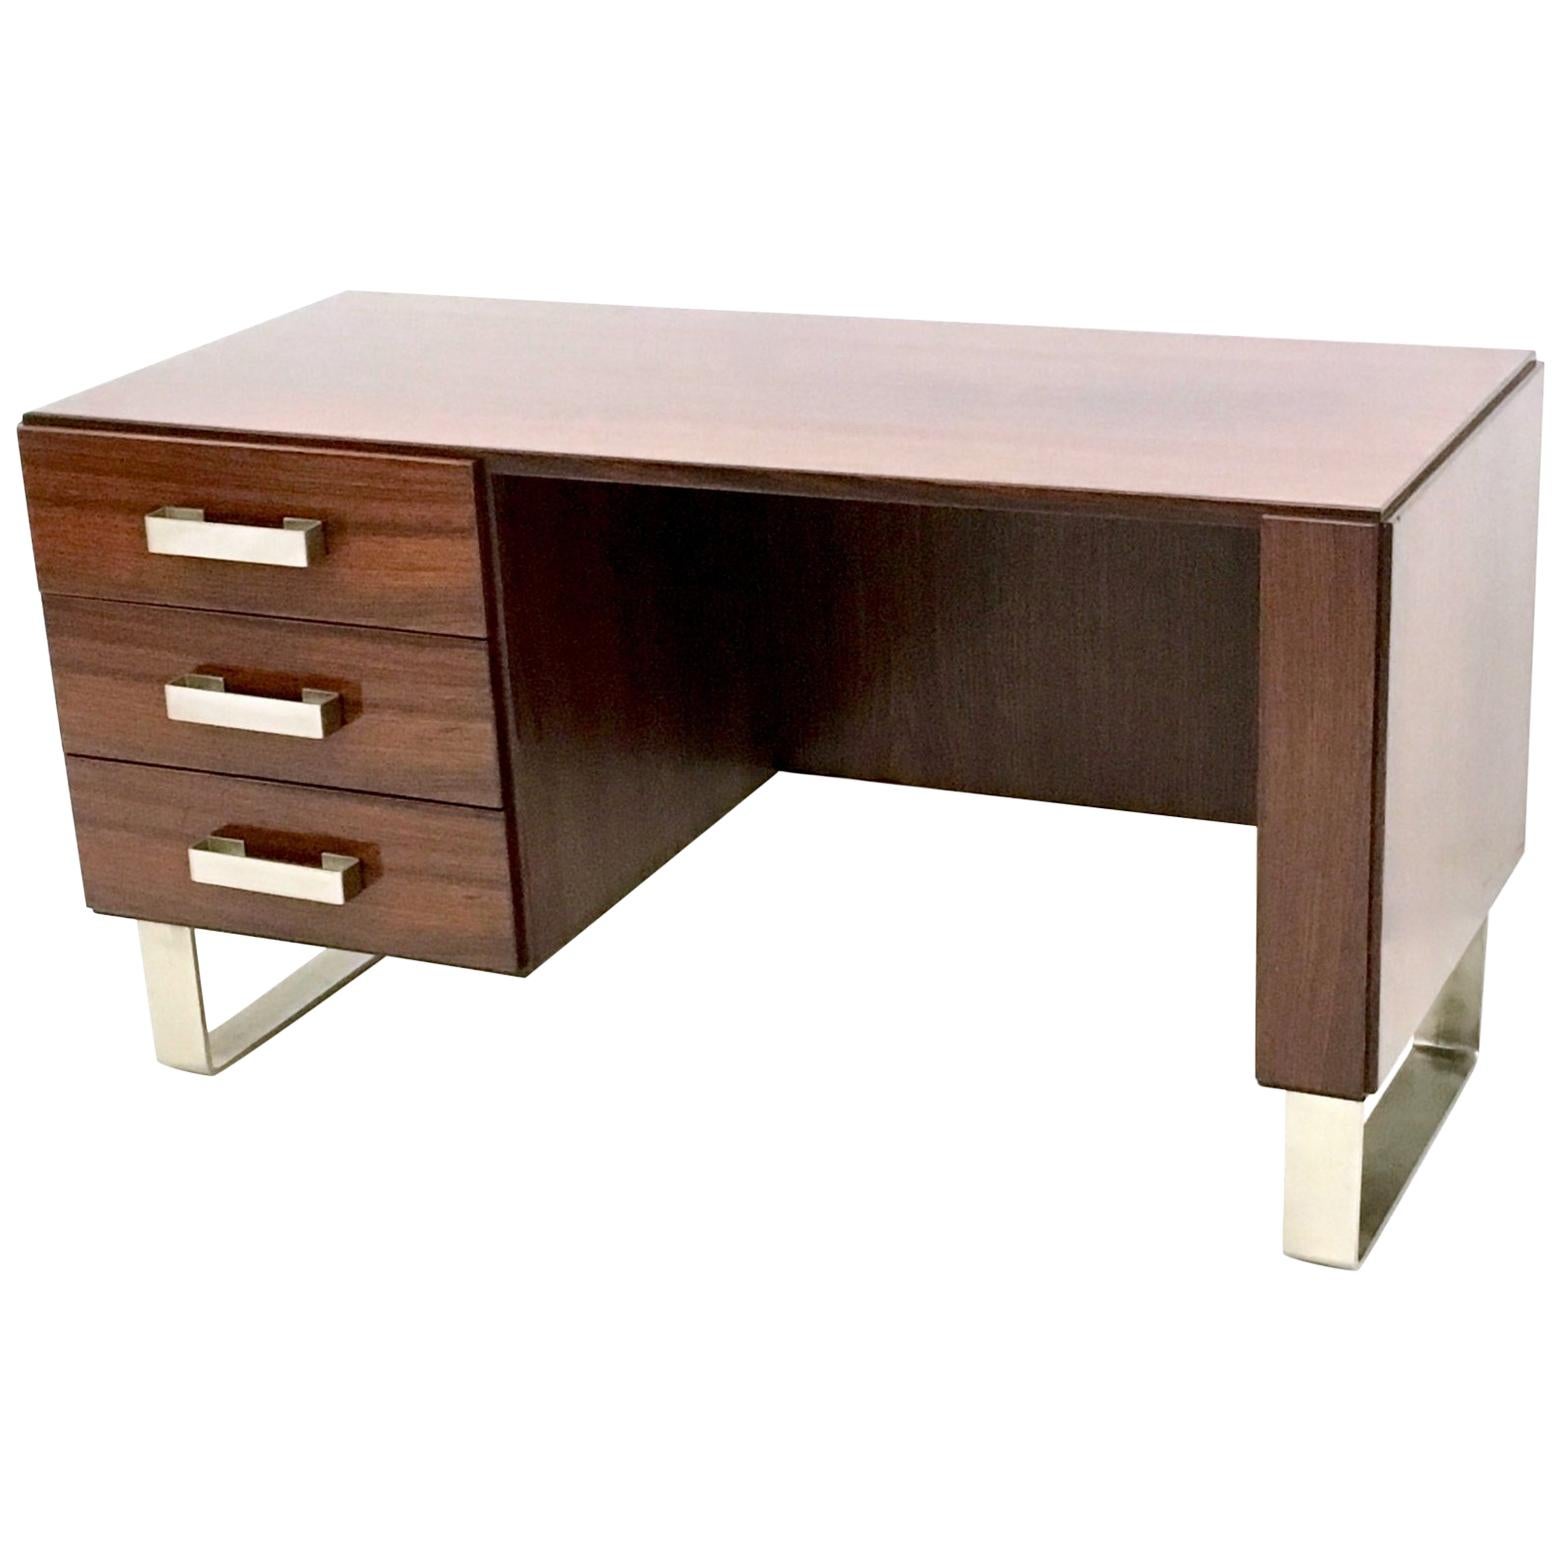 Midcentury Wooden Writing Desk with Nickel-Plated Metal Details, Italy, 1970s